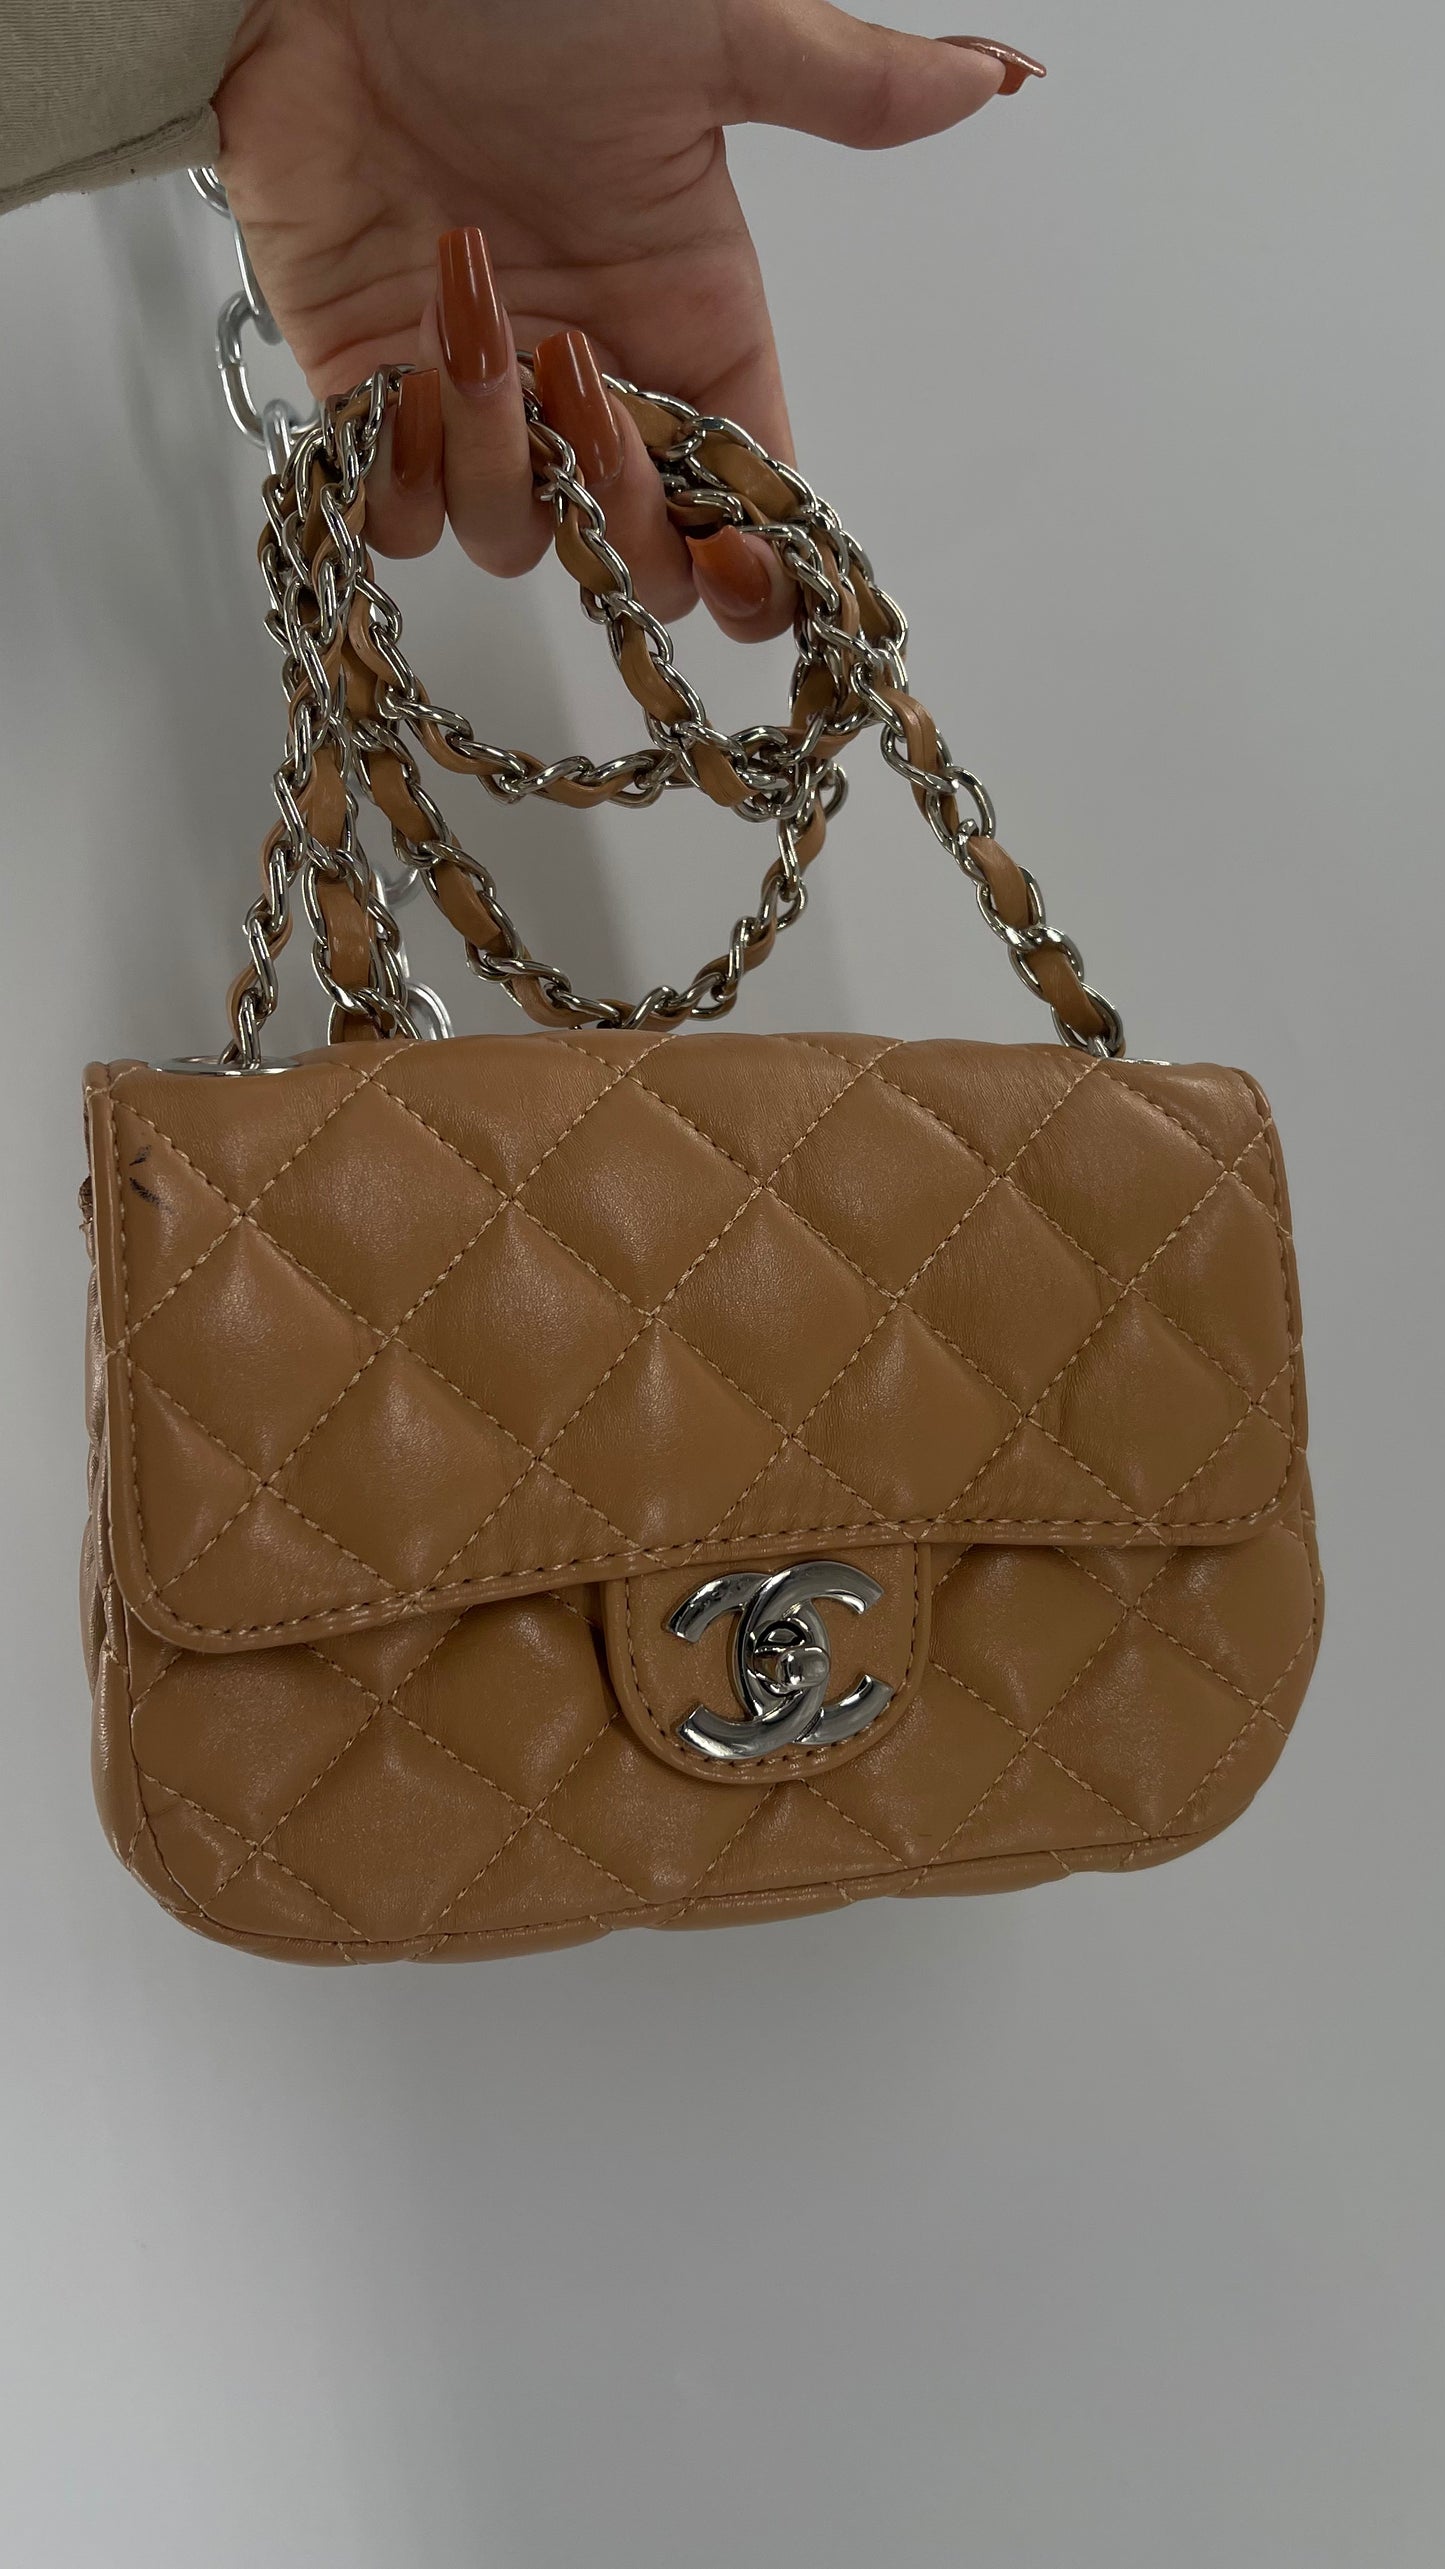 Tan Metallic Quilted Inauthentic Chanel Bag with Silver Chain Strap